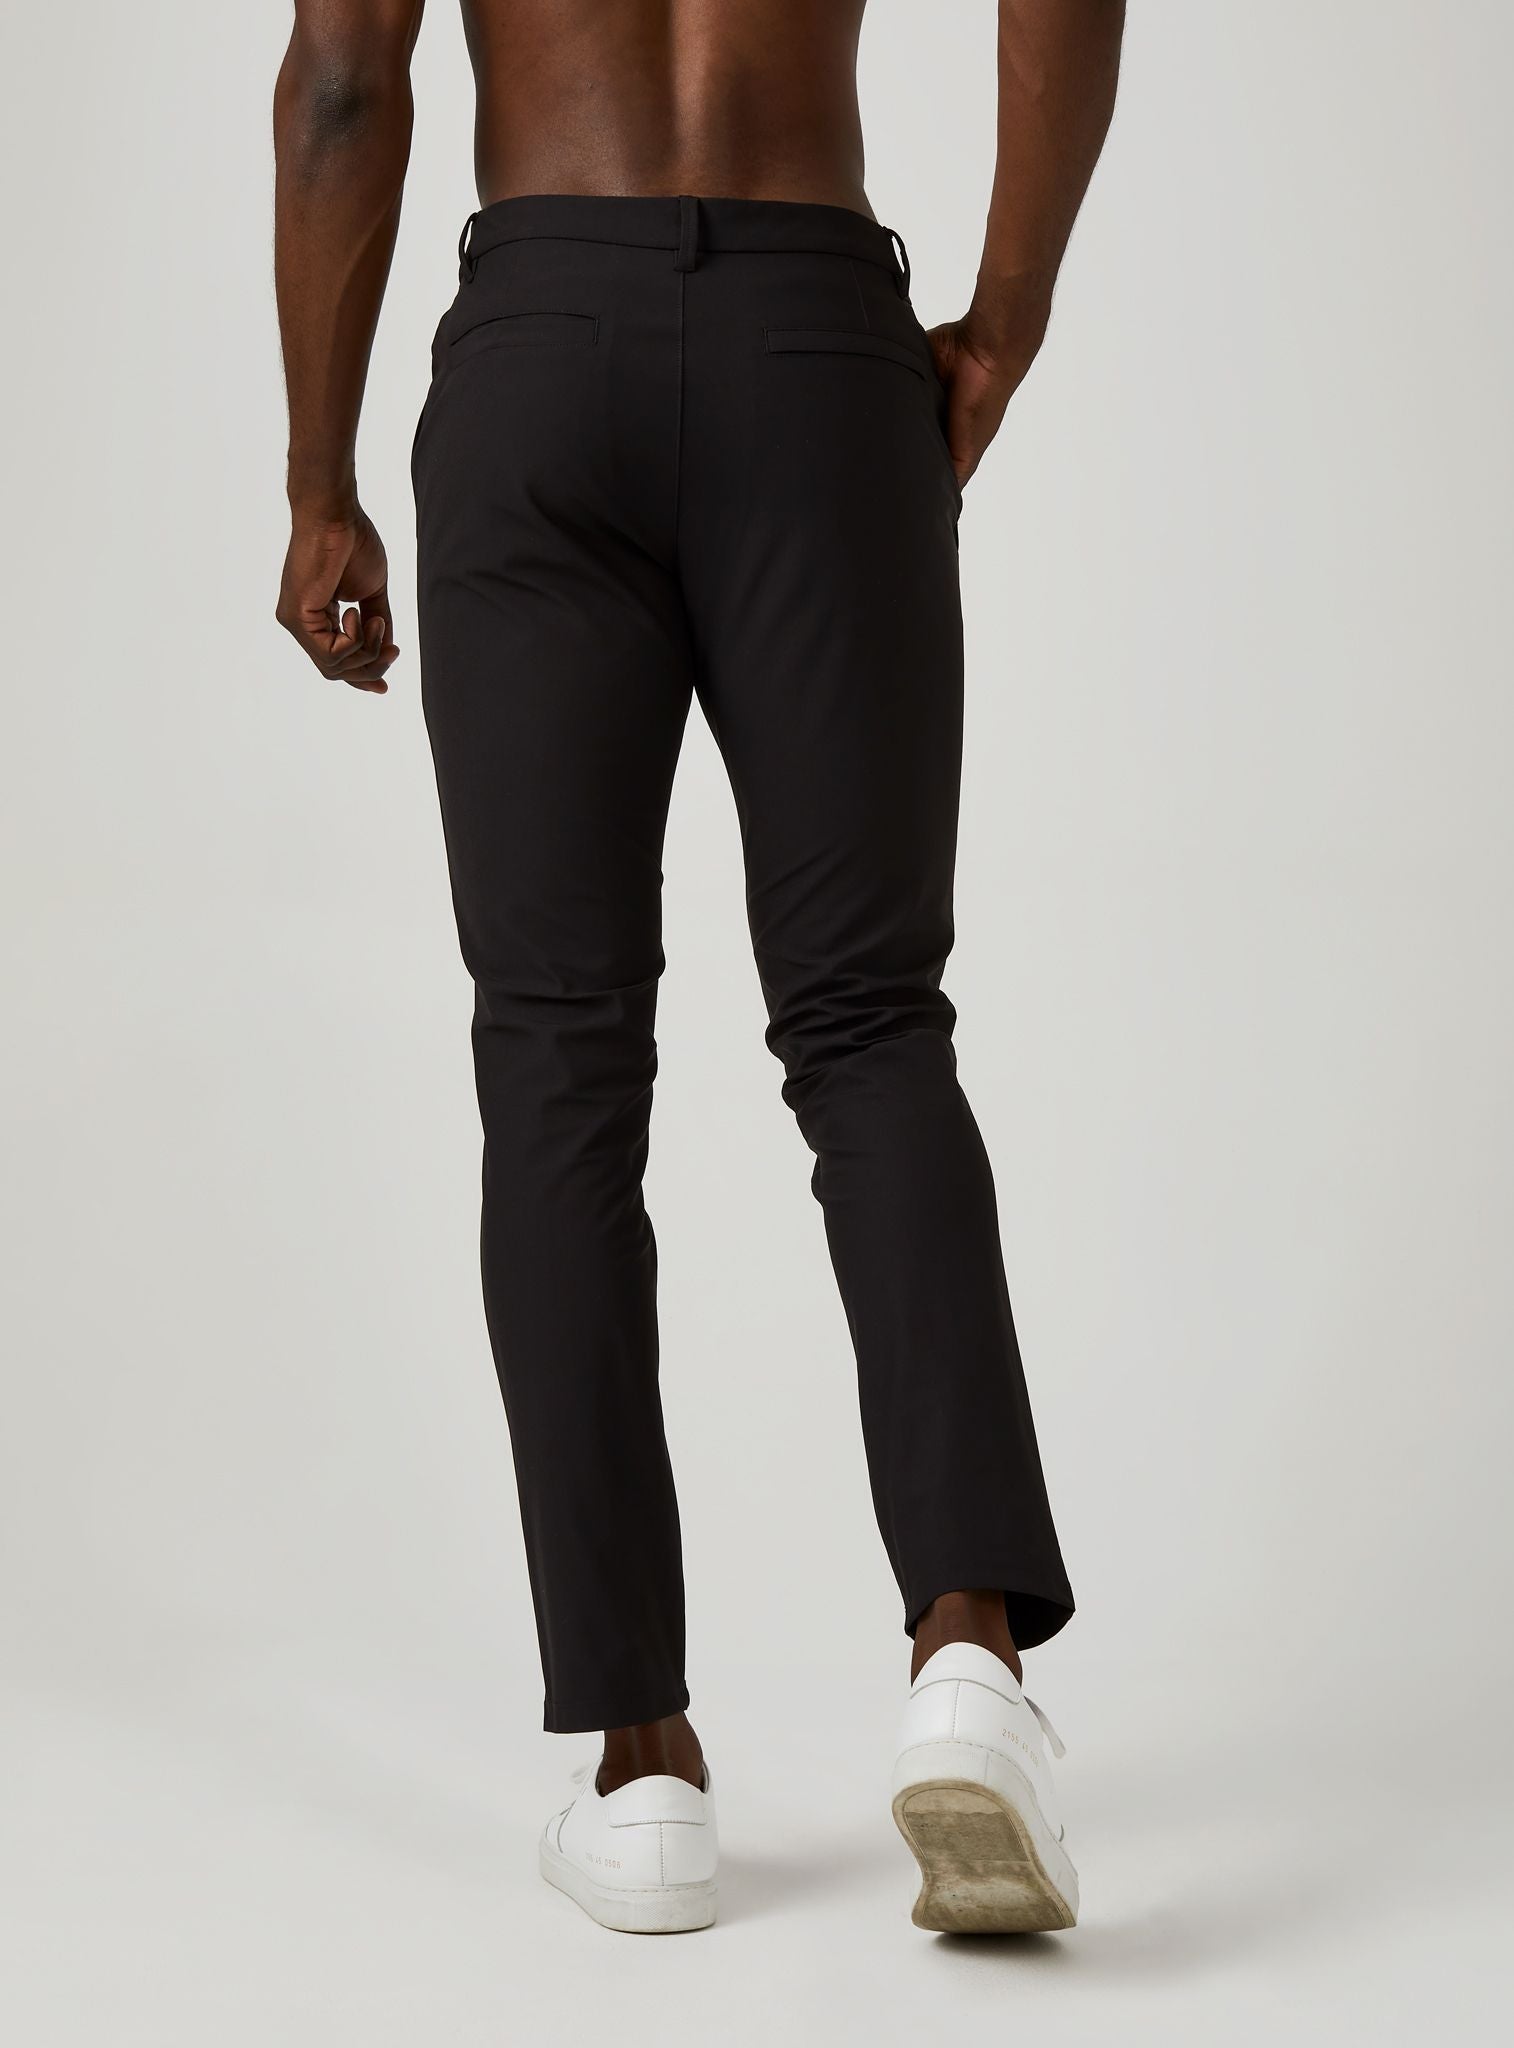 Infinity Chino Pants-Men's Bottoms-Vixen Collection, Day Spa and Women's Boutique Located in Seattle, Washington